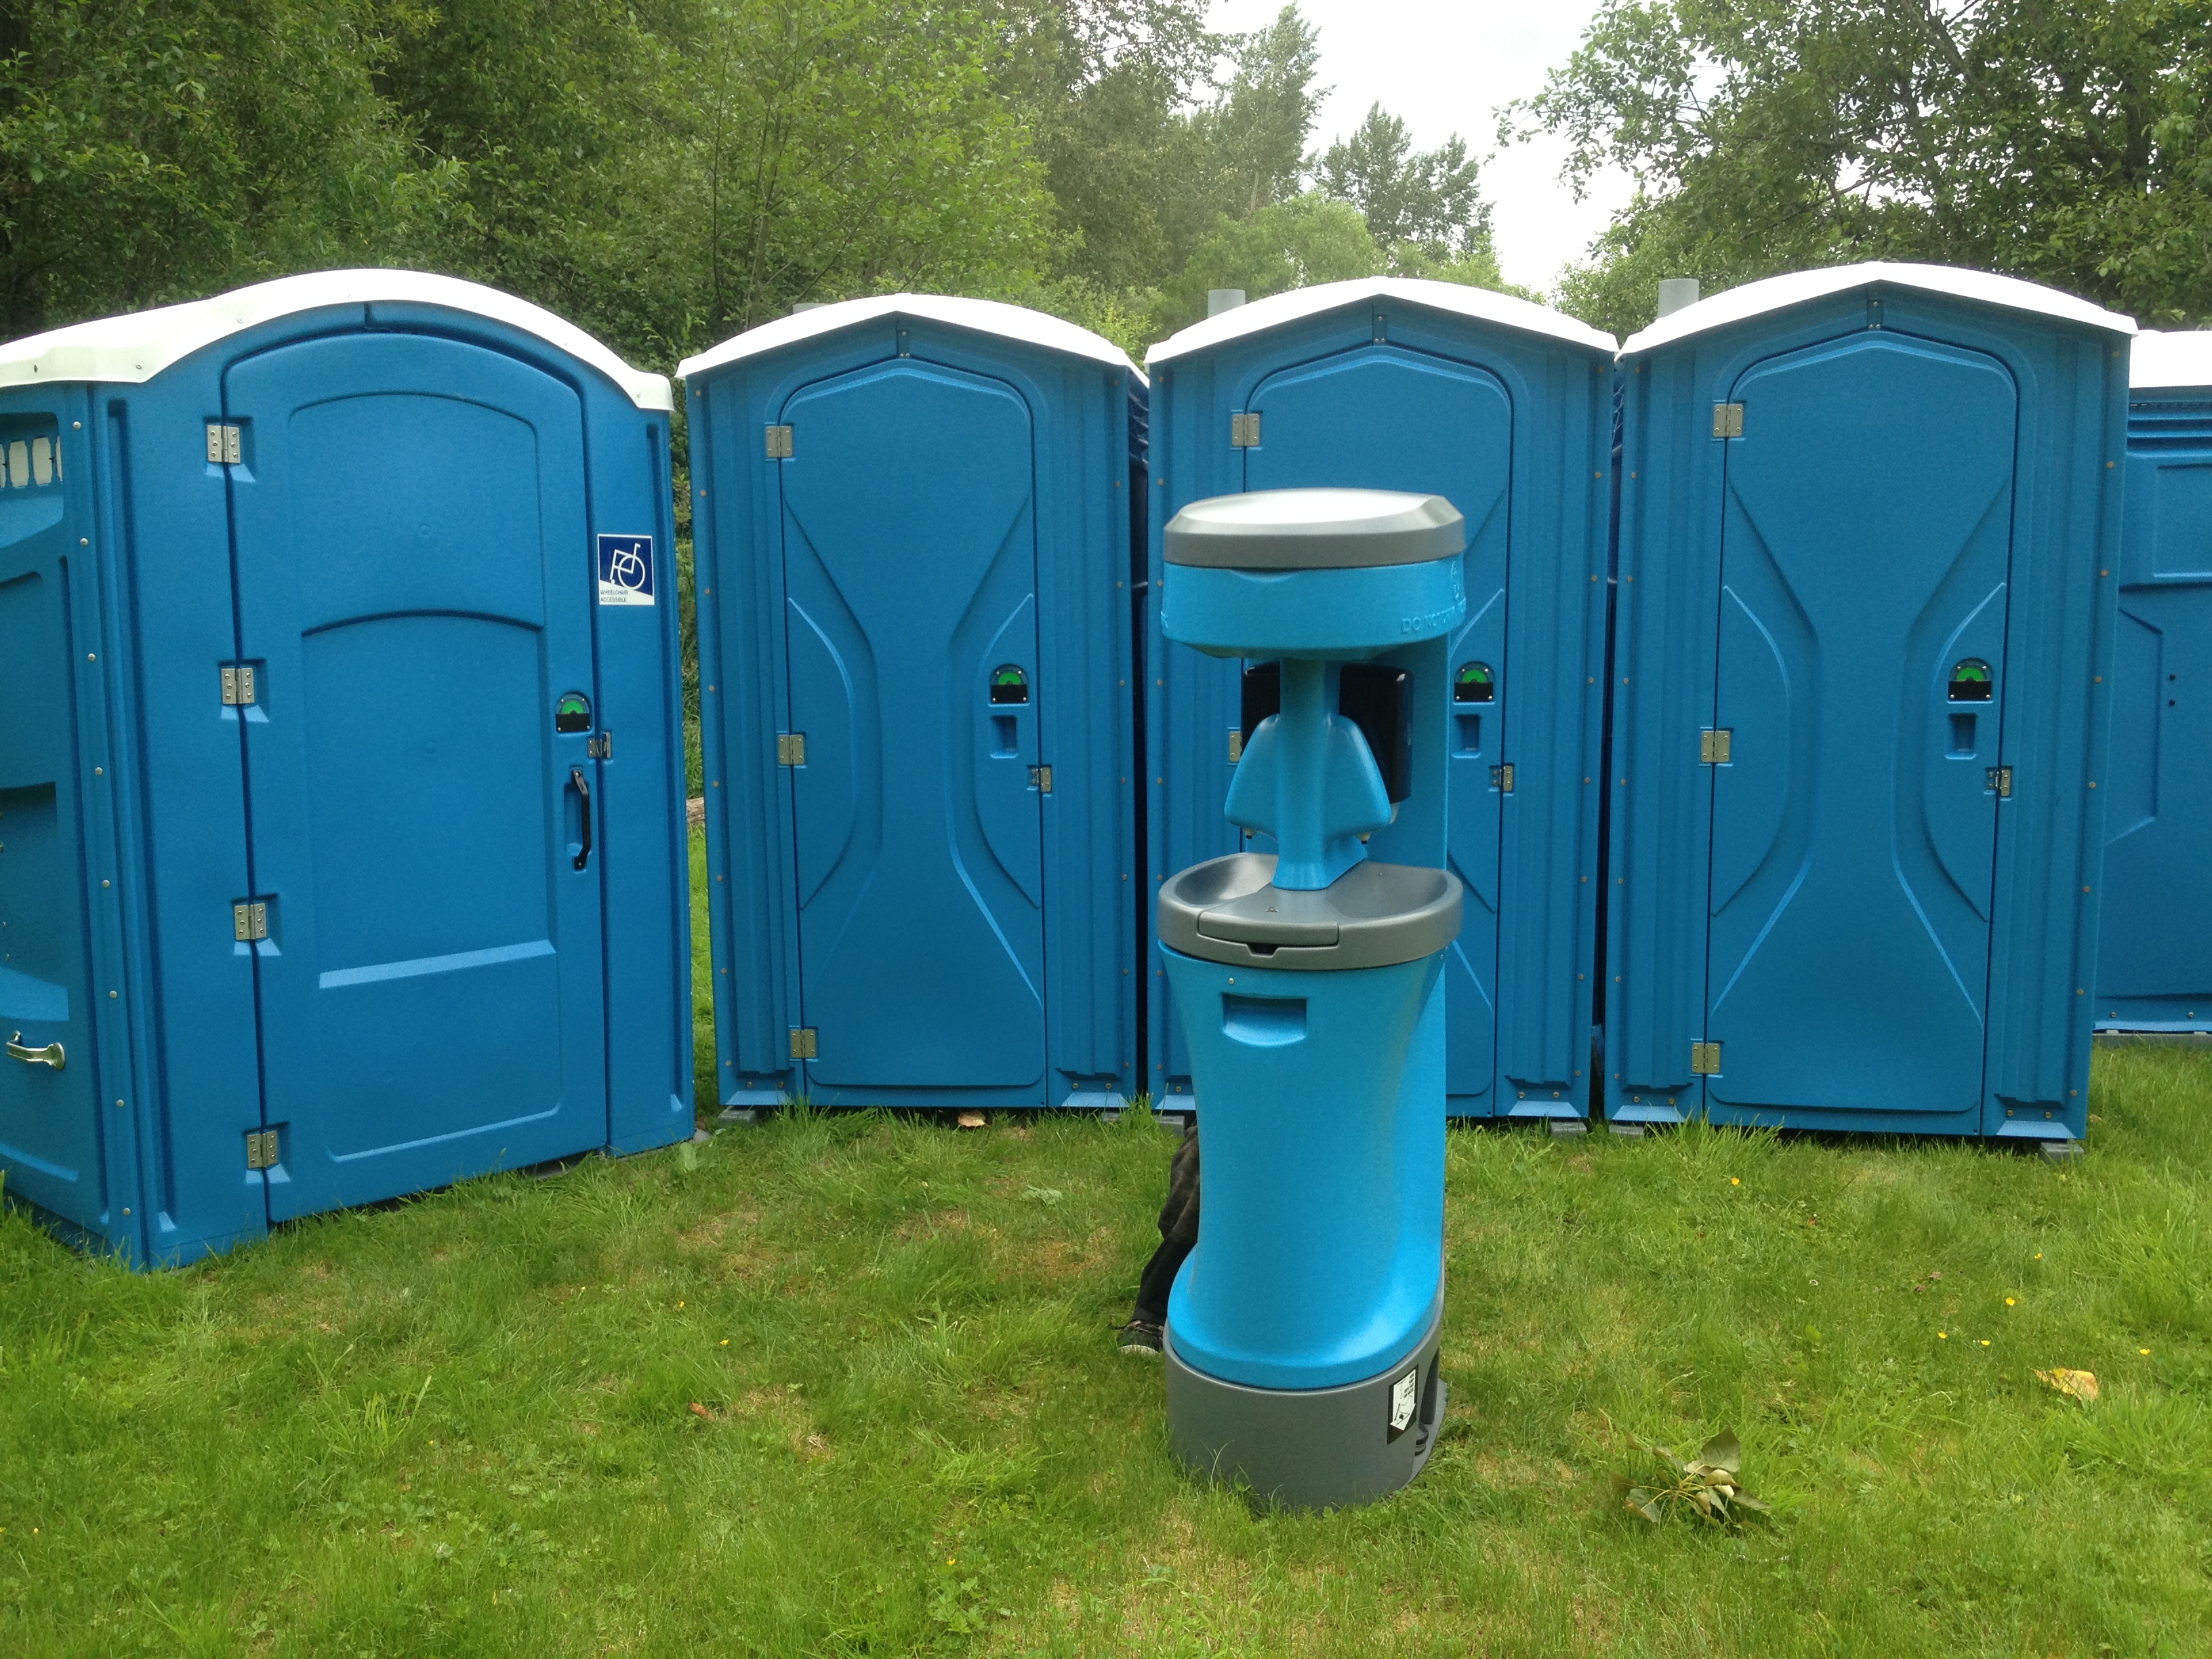 Porta Potty Rental Cost Complete Guide Prices